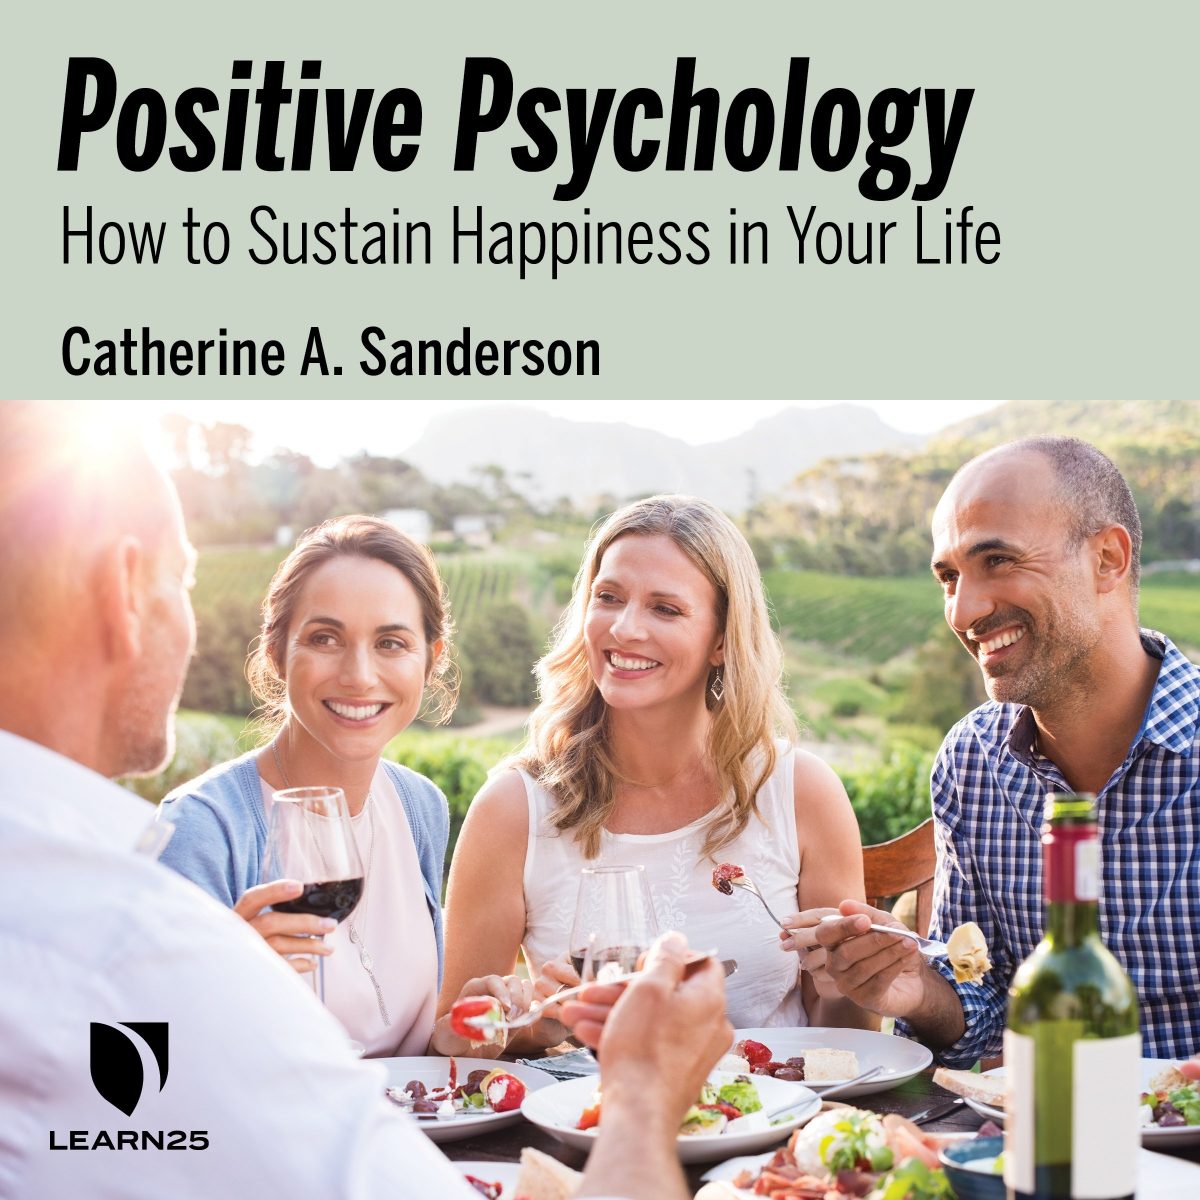 Positive Psychology How To Sustain Happiness In Your Life Learn25 